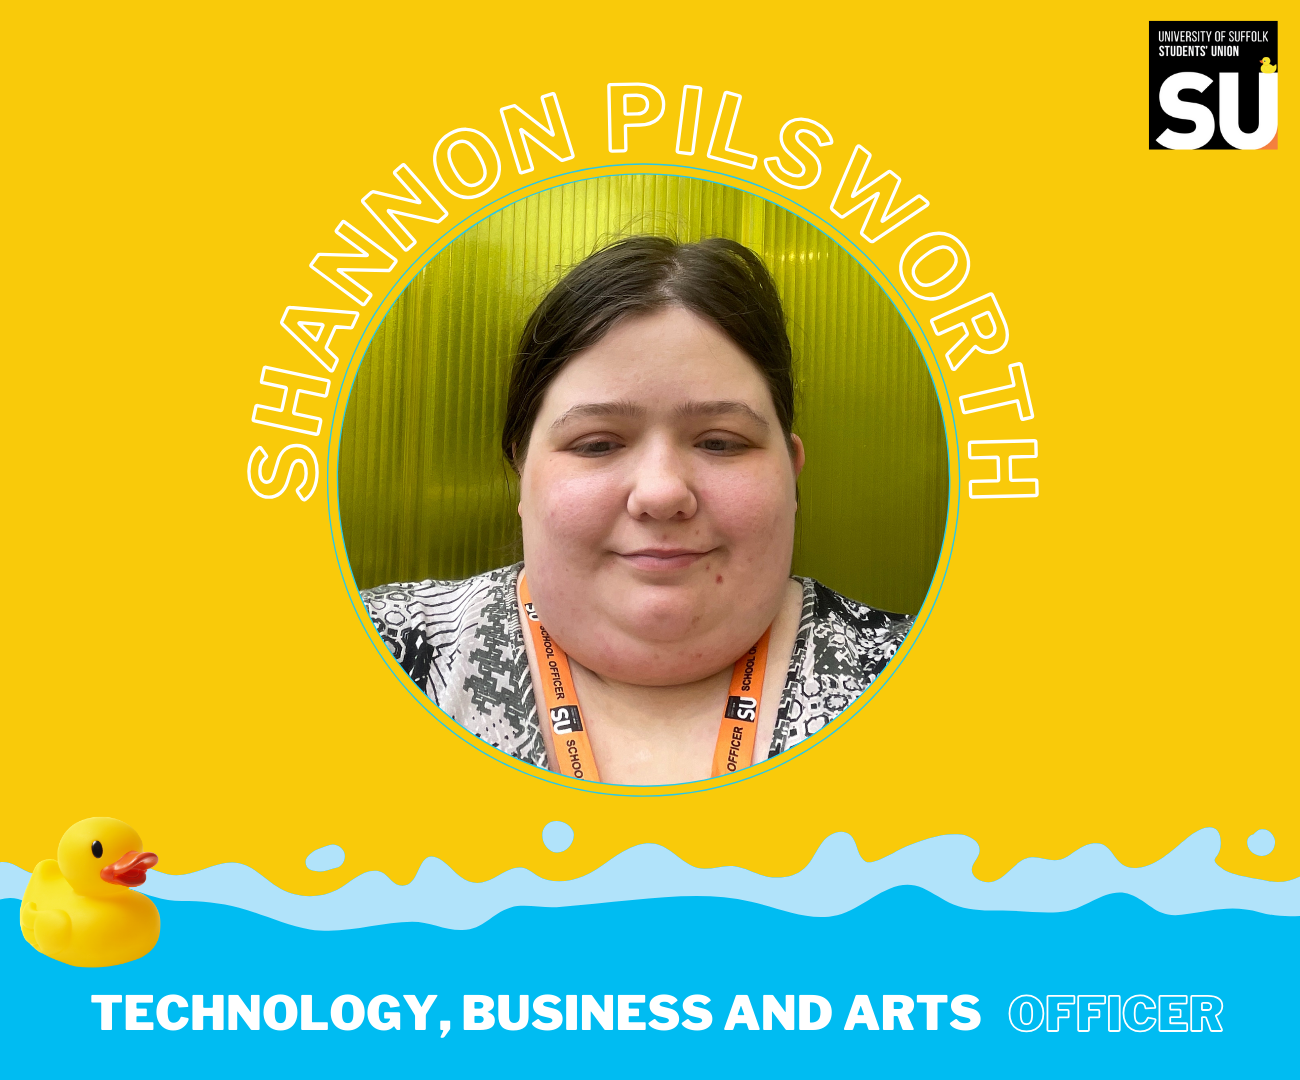 Shannon technology,business and arts officer